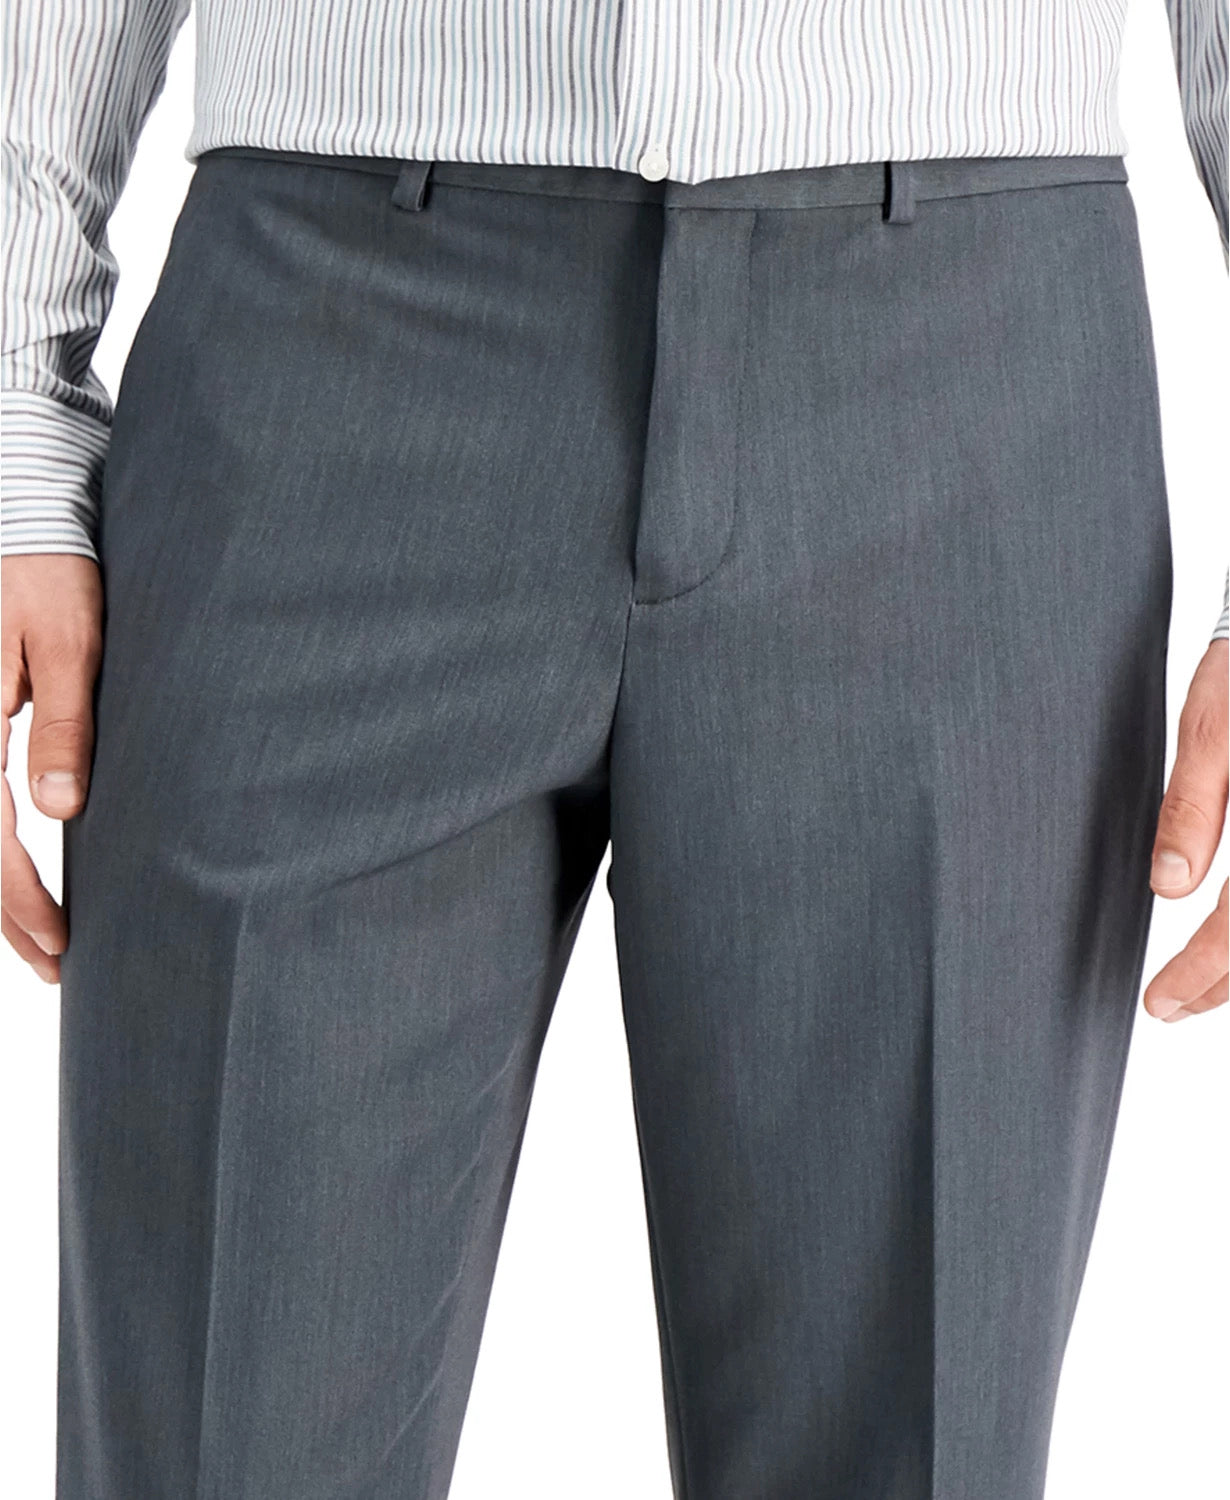 Perry Ellis Mens Pants Smoked Pearl 38 x 32 Grey Modern-Fit Stretch Solid